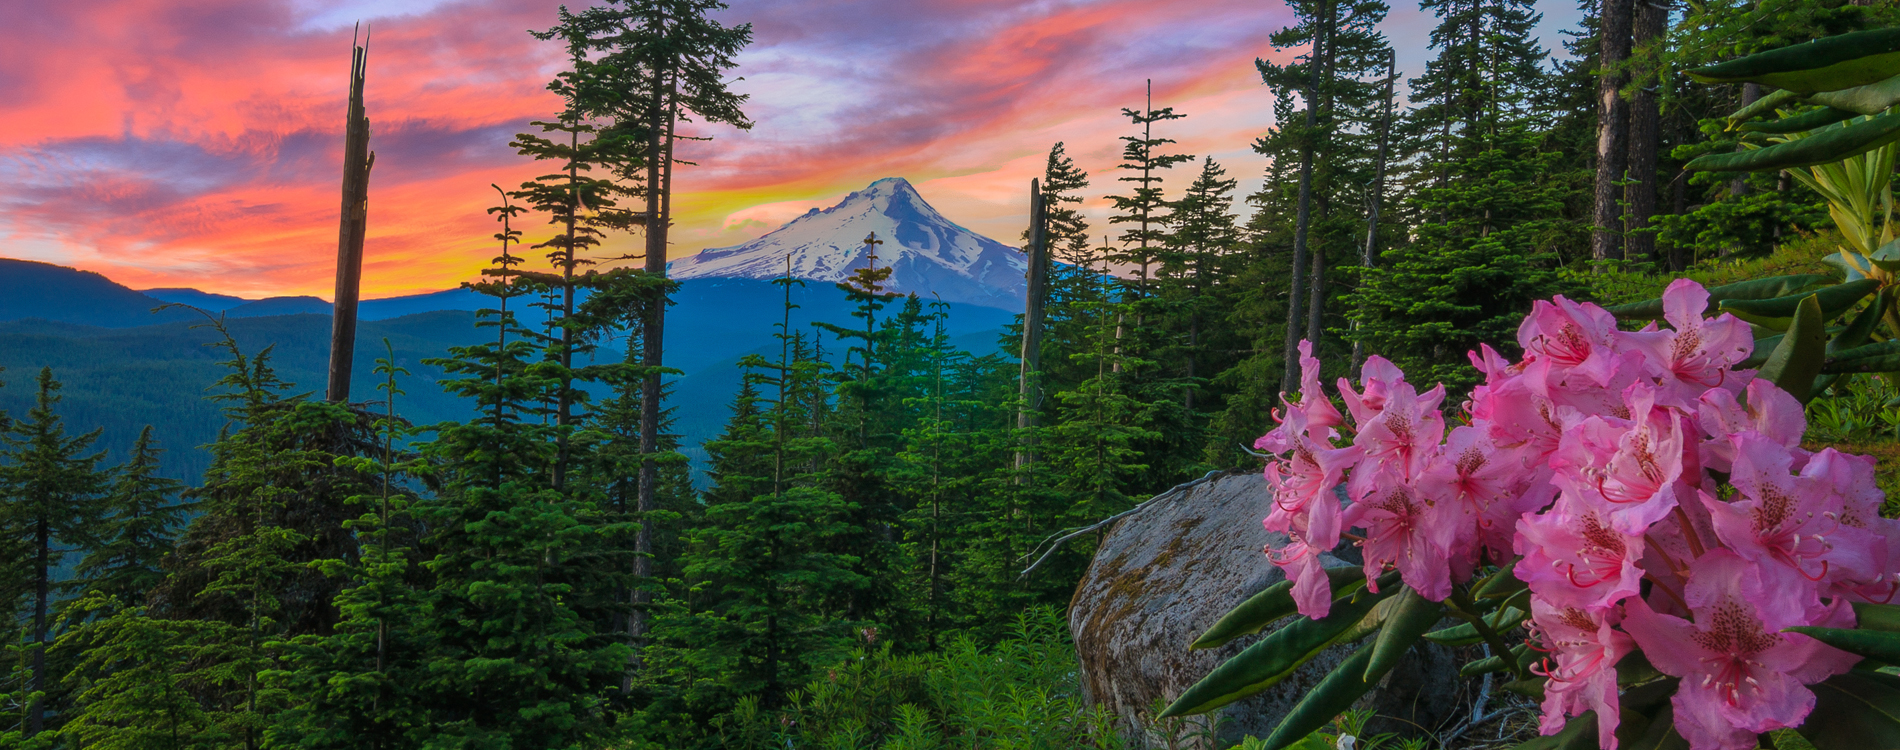 Mount Hood, OR - Mountain with Wildflowers